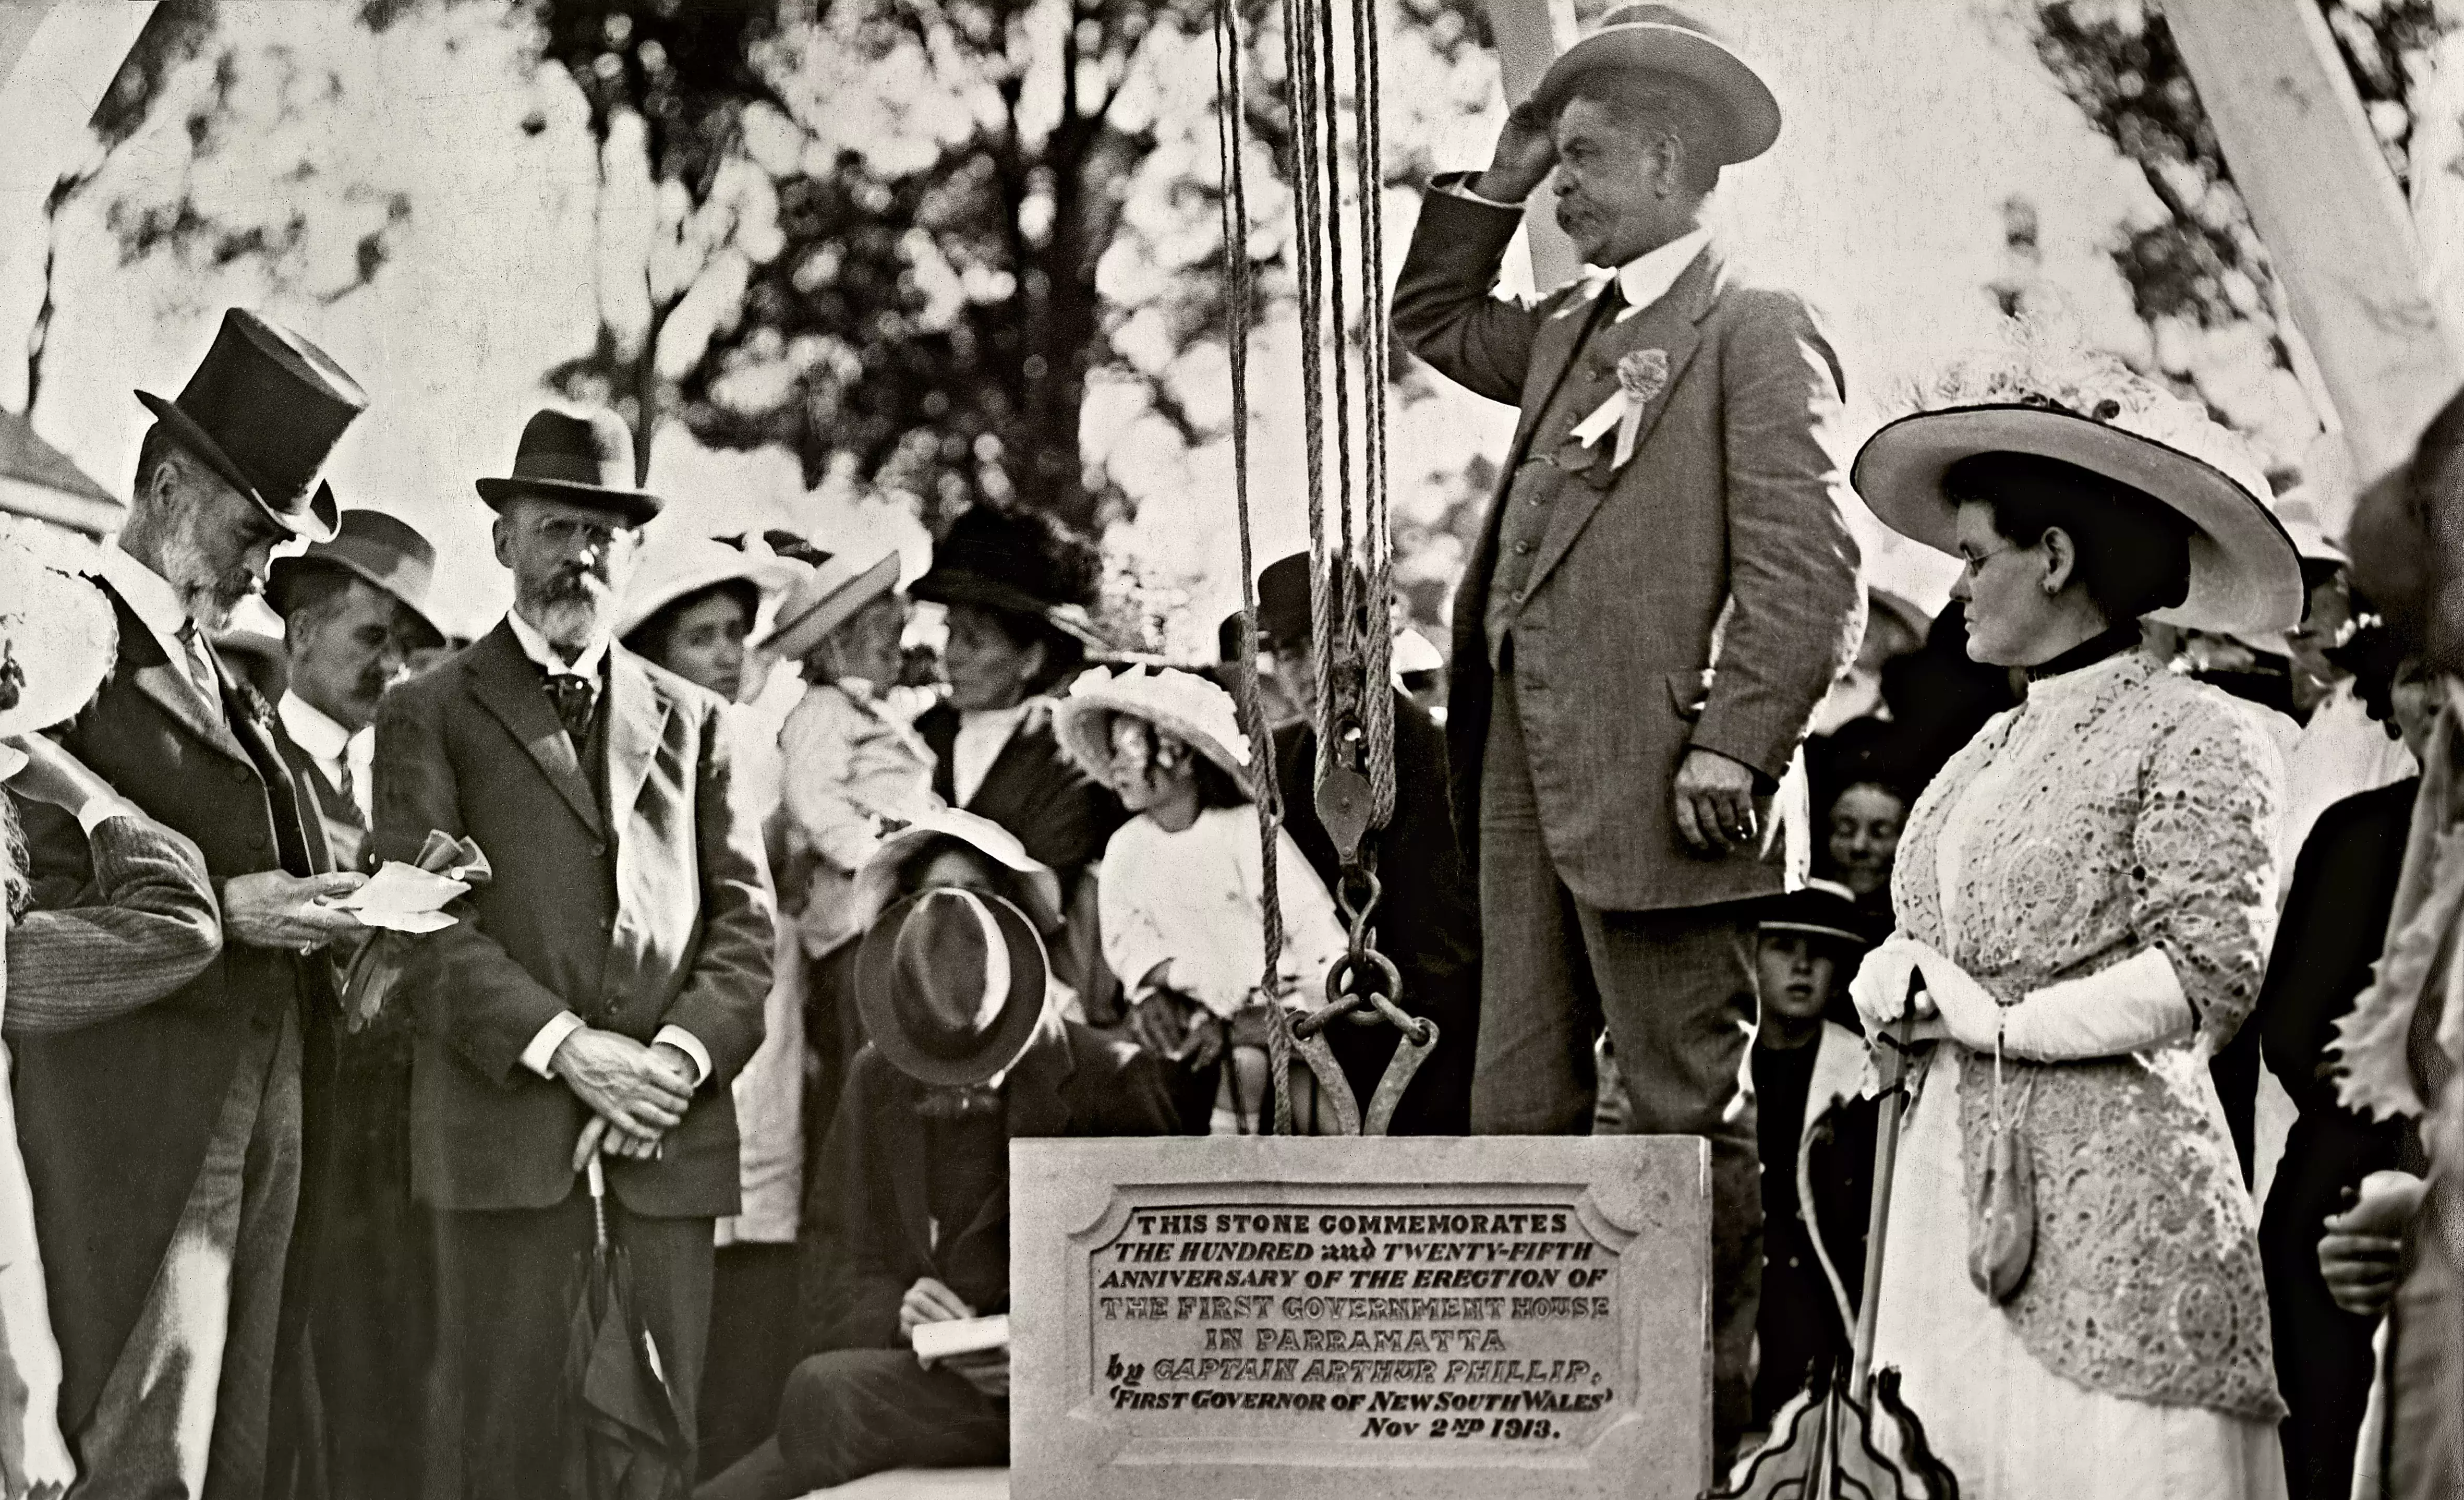 A man stands on a soap box surrounded by people. Joseph Cook looks at him from the crowd. 